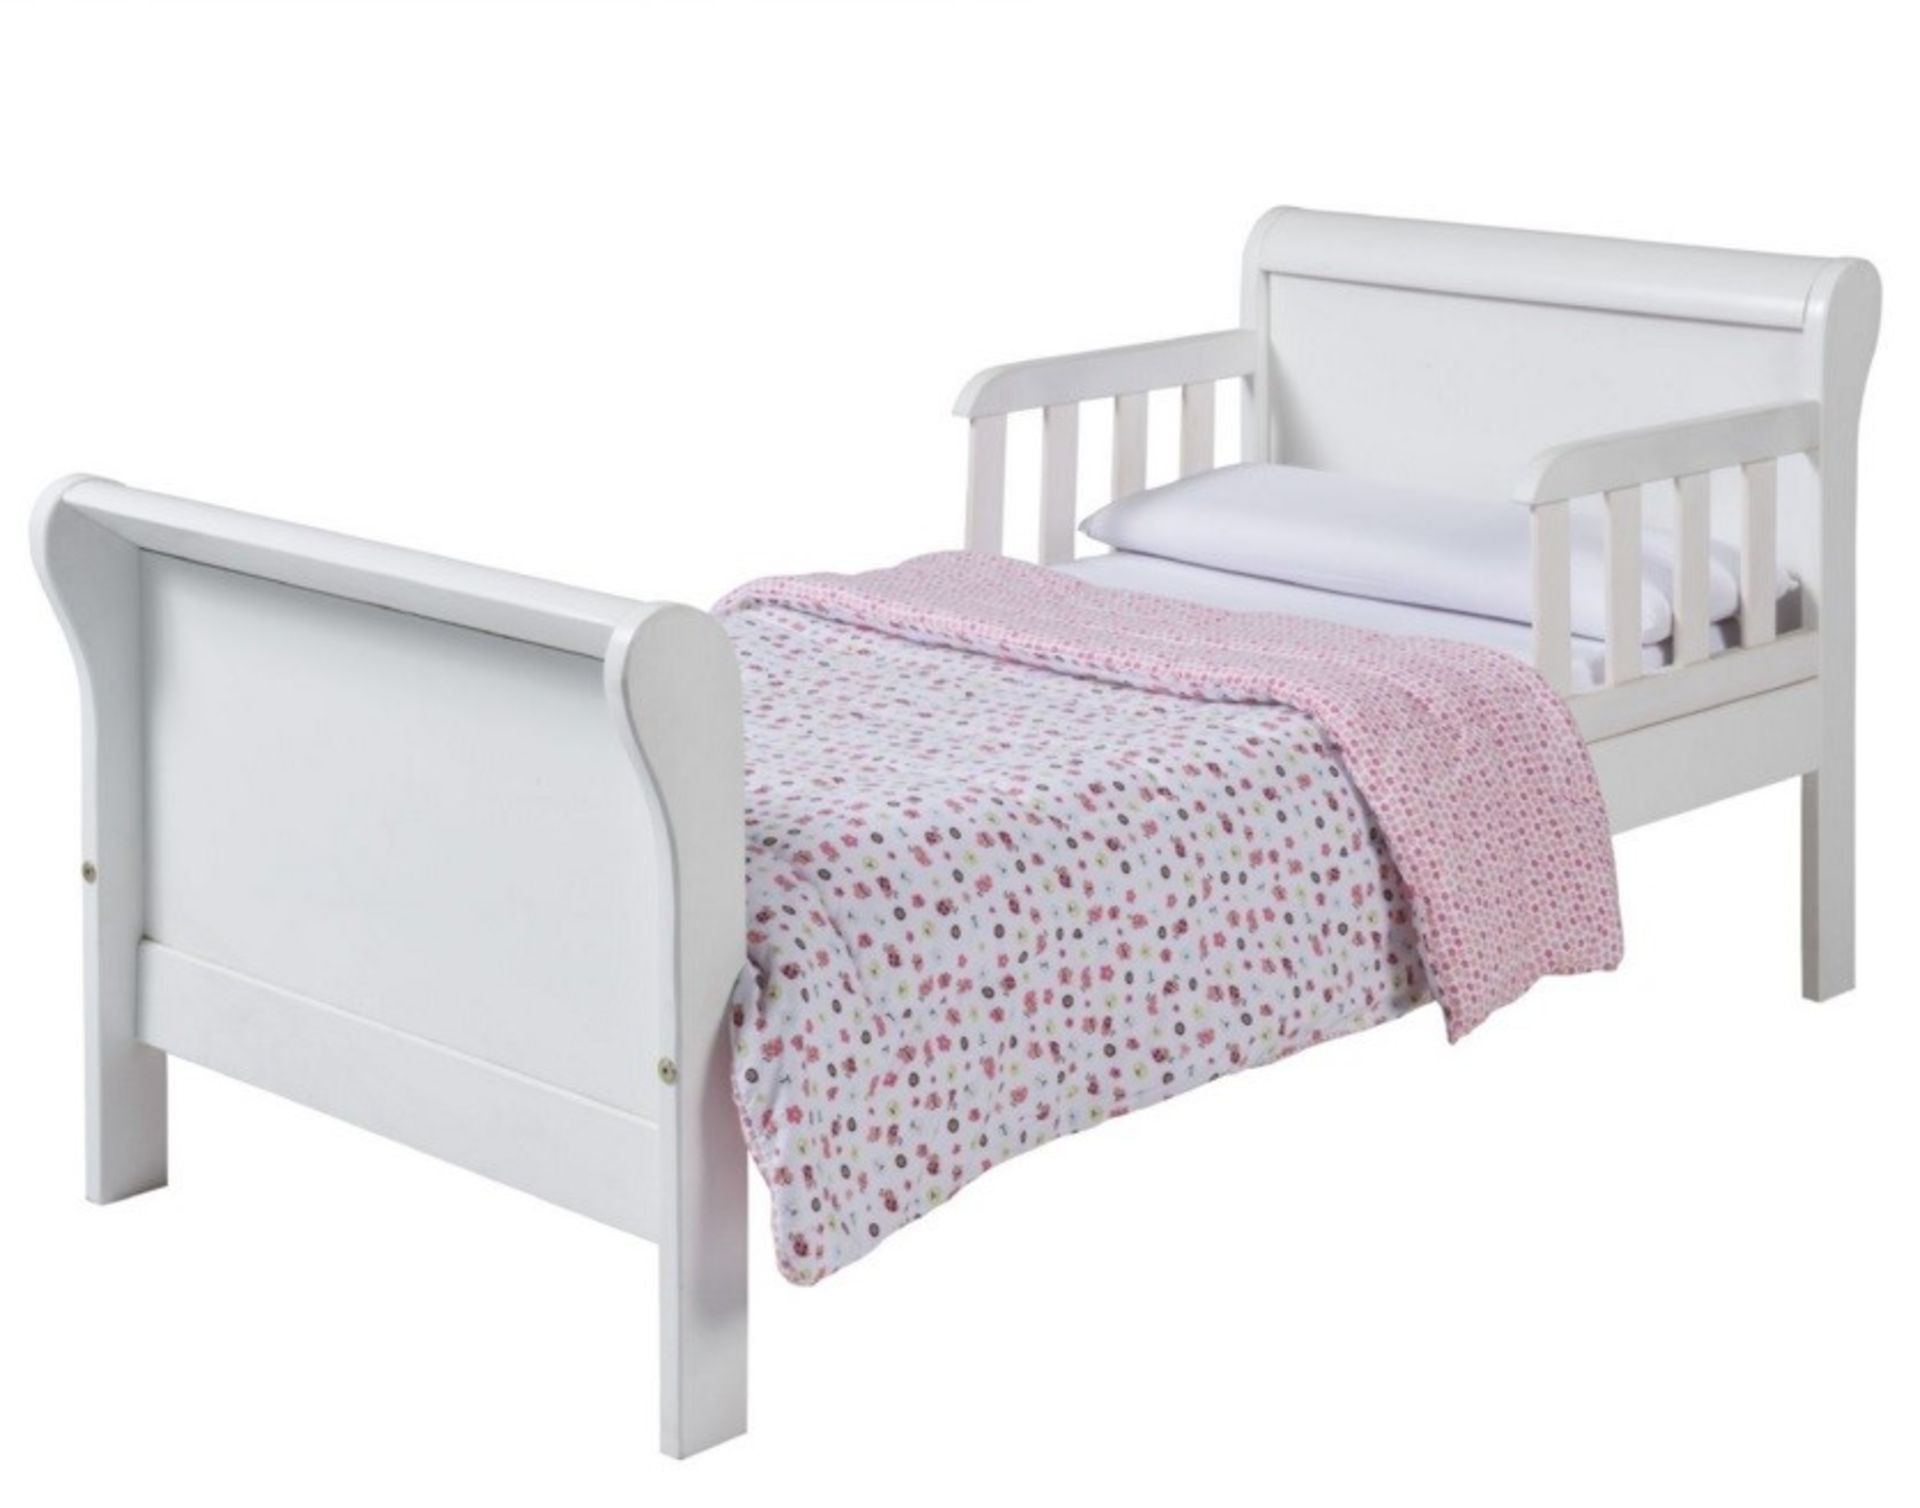 1 x Daisy Sleigh Bed Frame in White - Solid Wood - Features Siderails - Bedroom Nursery - Ideal